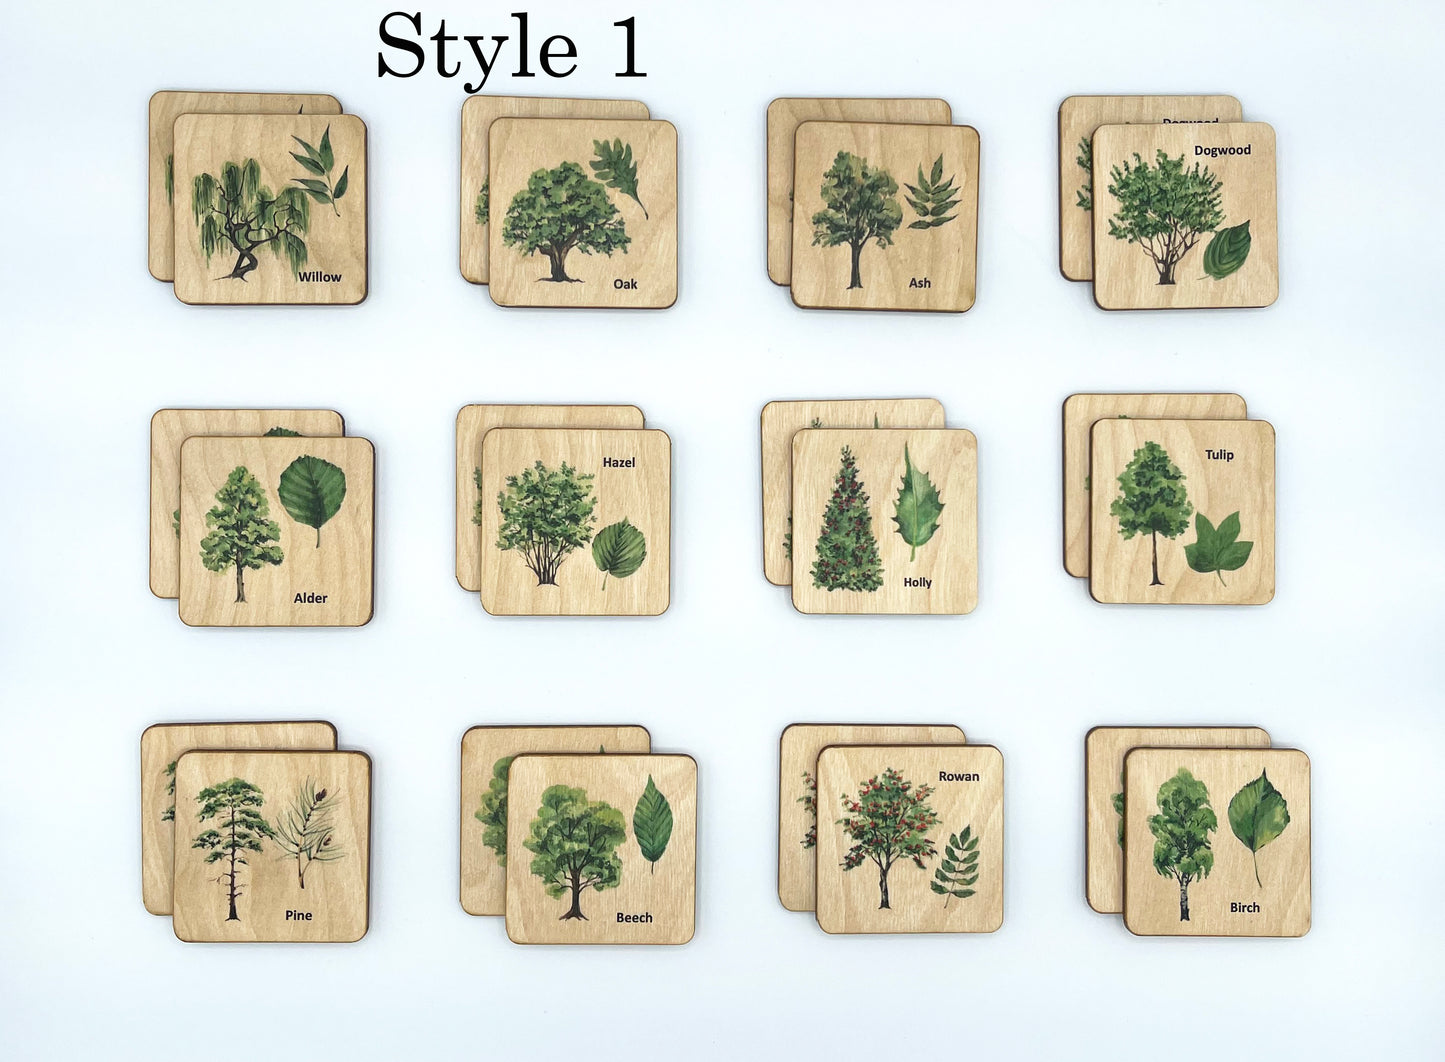 Wooden North American Tree leaf Matching Game